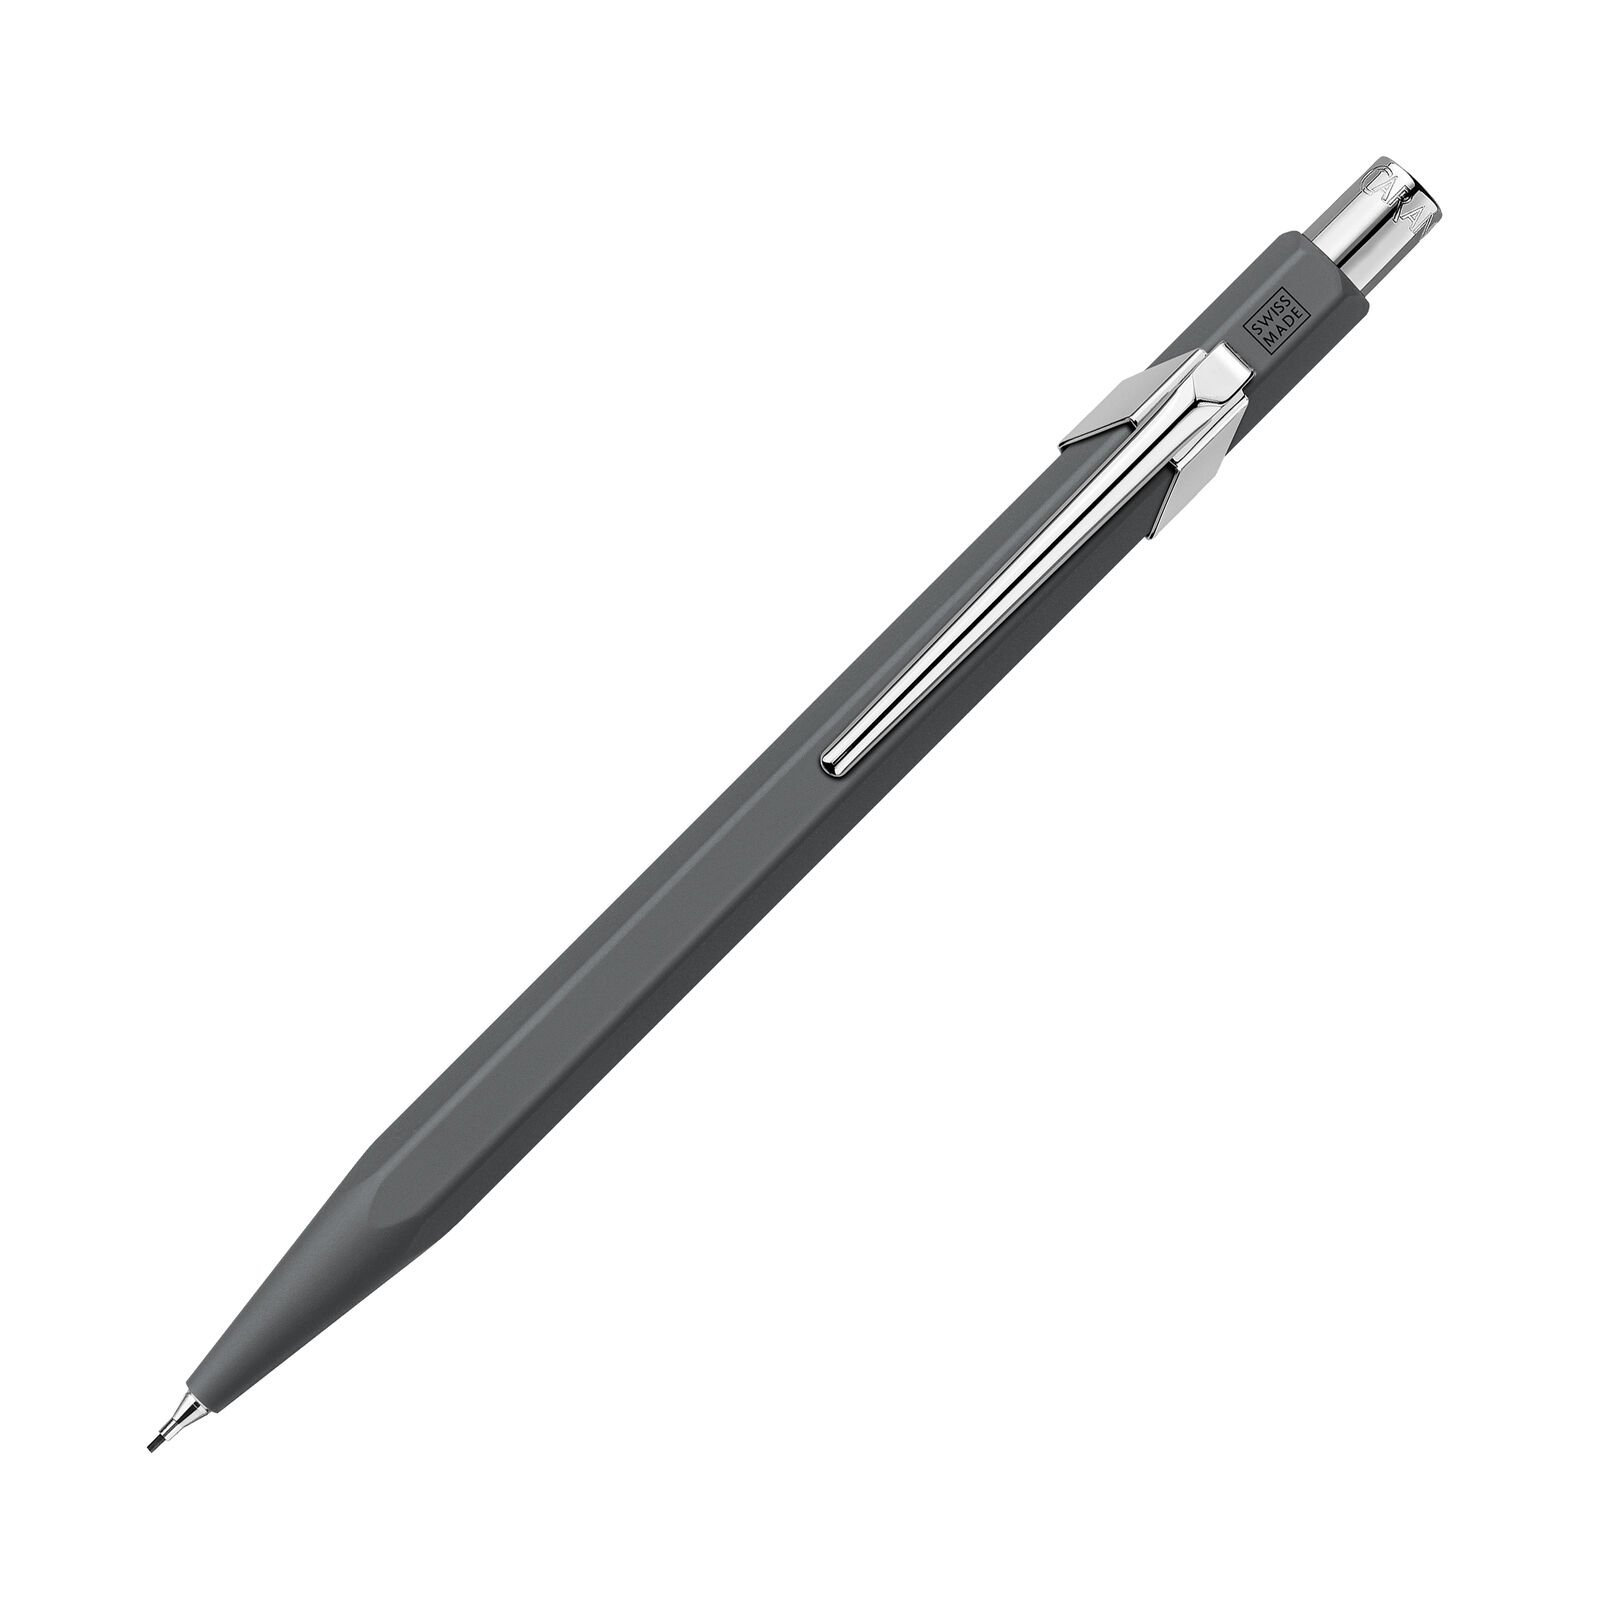 Caran d\'Ache 844 Metal Collection Mechanical Pencil in Anthracite Grey - 0.7mm